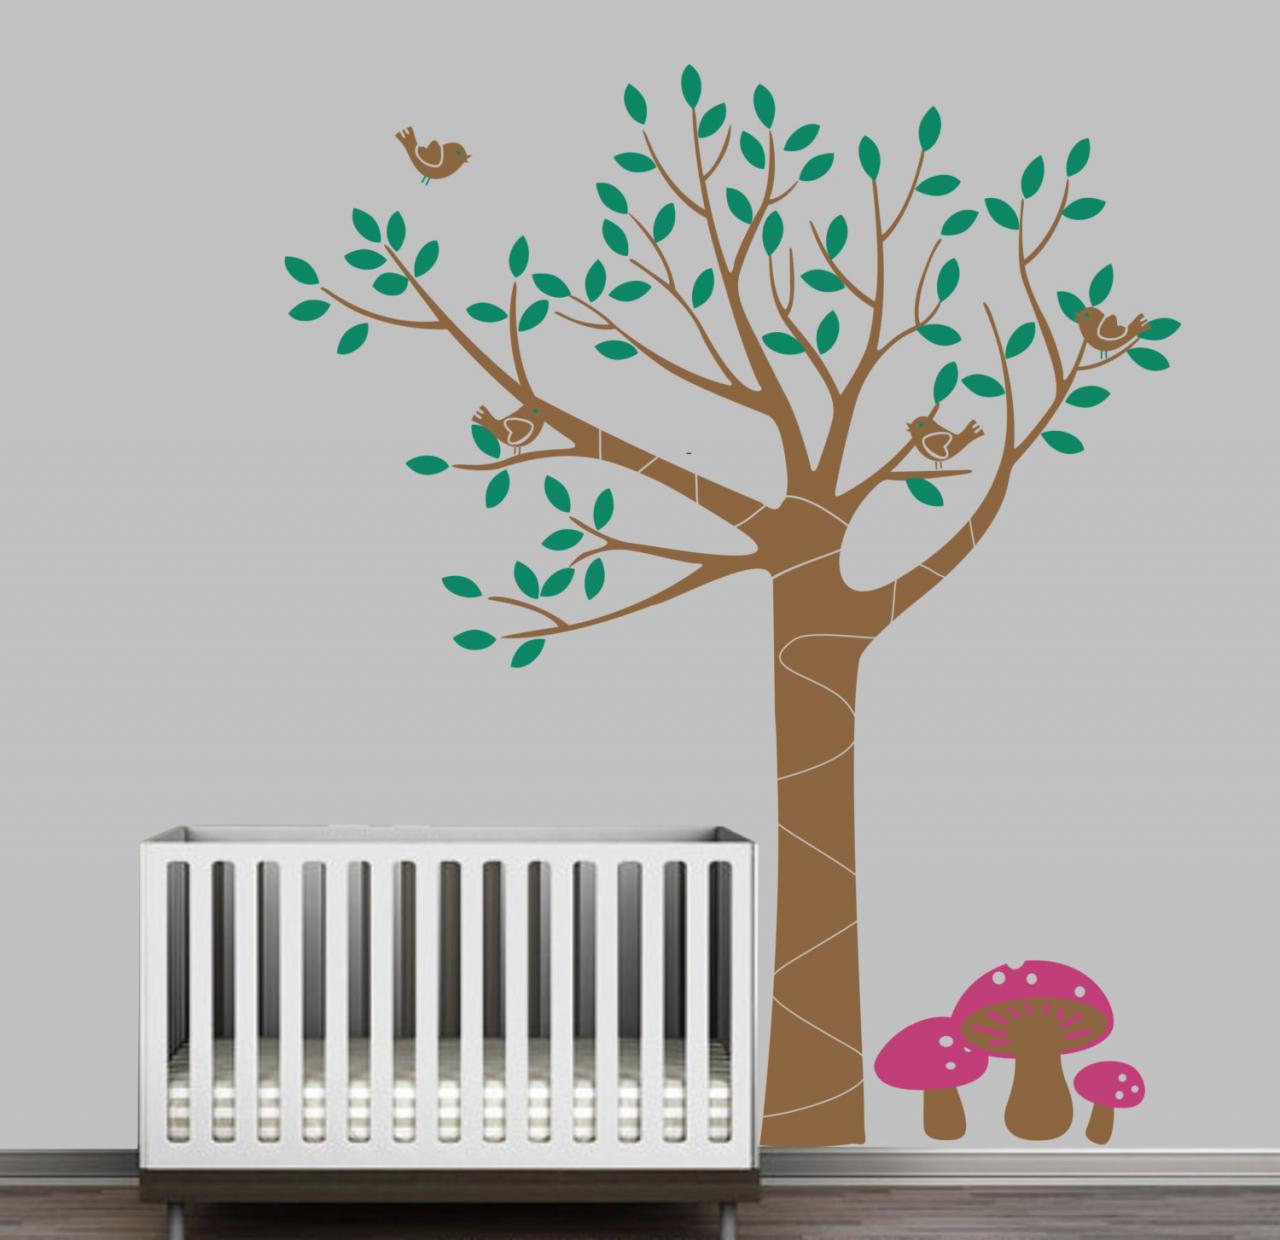 Vinyl Wall Decal Beautiful Tree With Birds Bird Leaf Leaves Mushroom Home House Art Wall Decals Wall Sticker Stickers Baby Room Kid R592